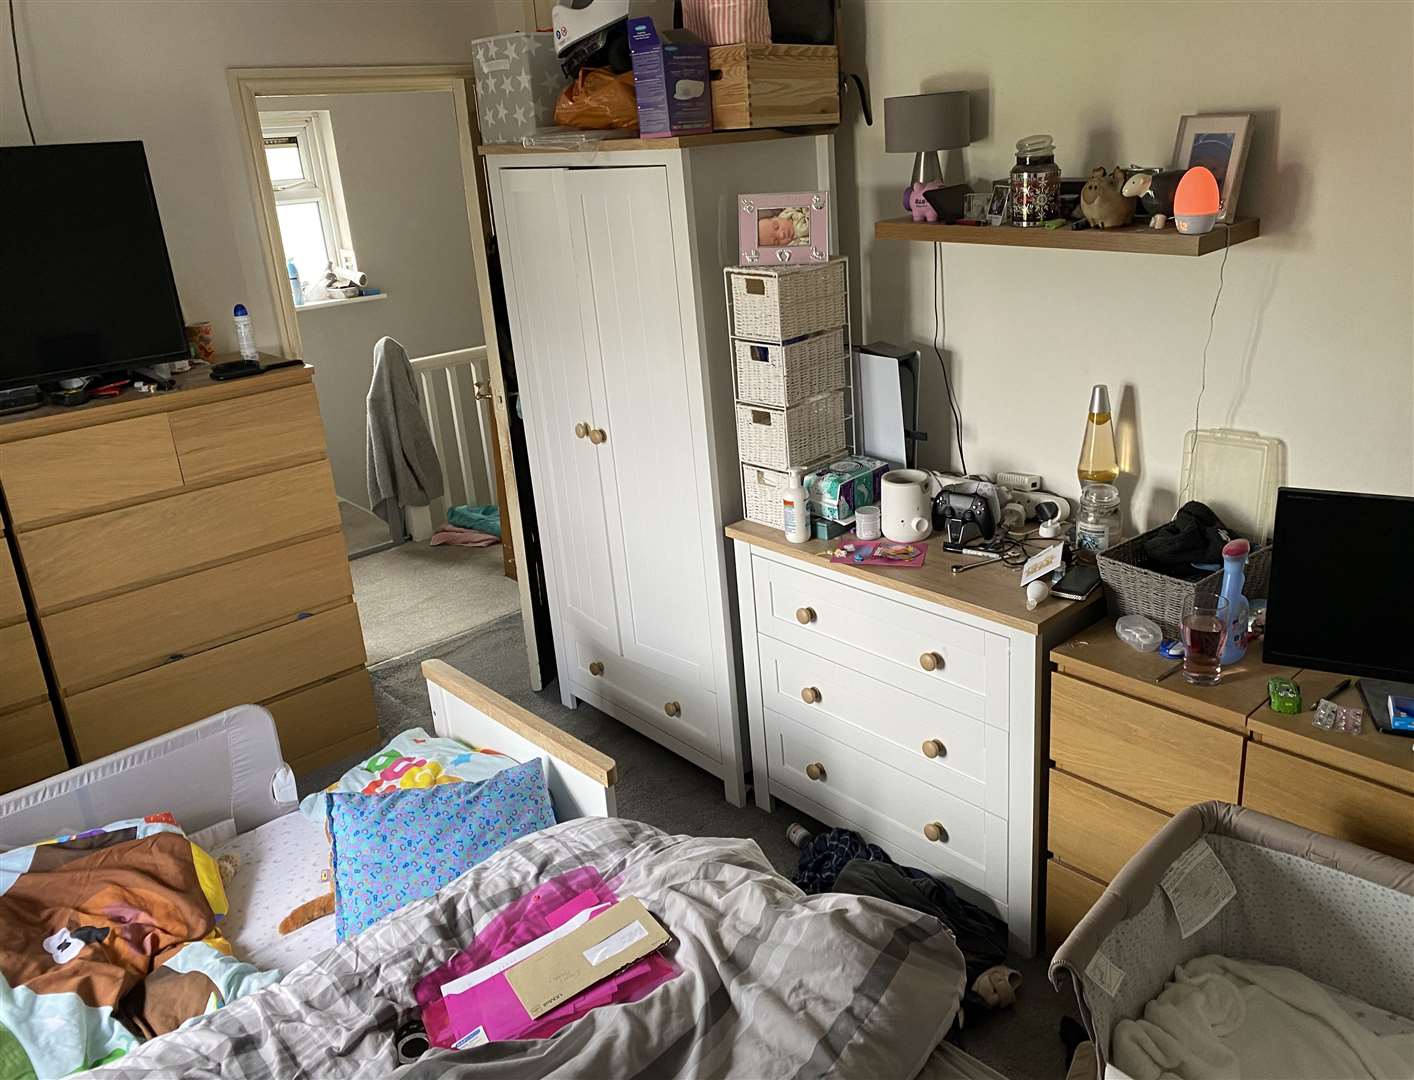 Cherina Turley has been waiting on the social housing list for over two years in Gravesend Photo: Cherina Turley